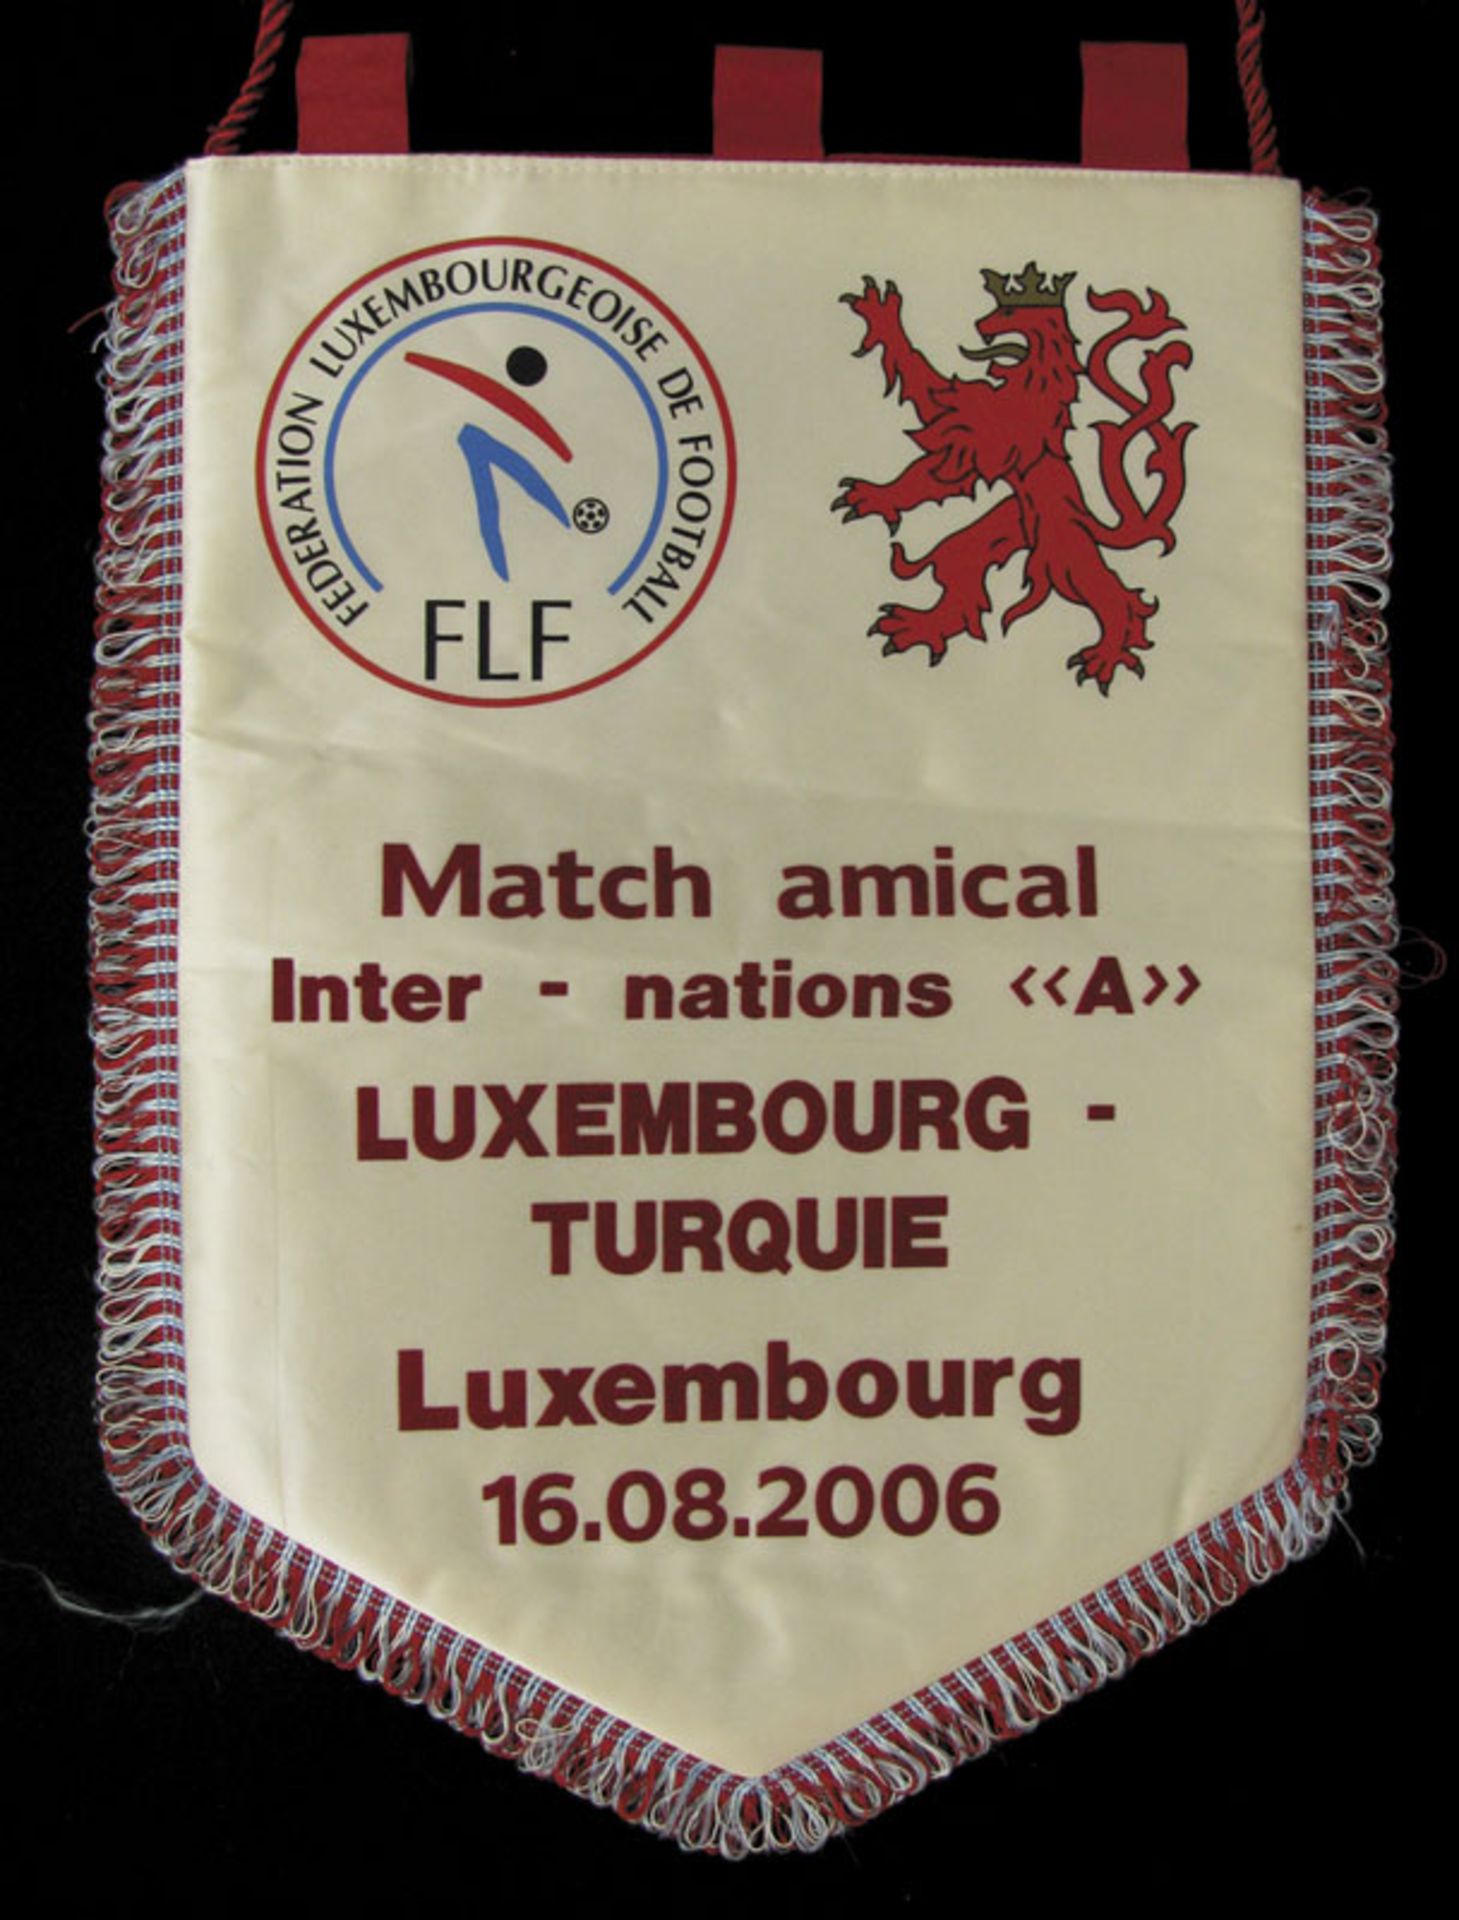 Pennant EURO Cup Quali 2004. Luxemburg - Decorative flocked match pennant "Match amical Inter - nati